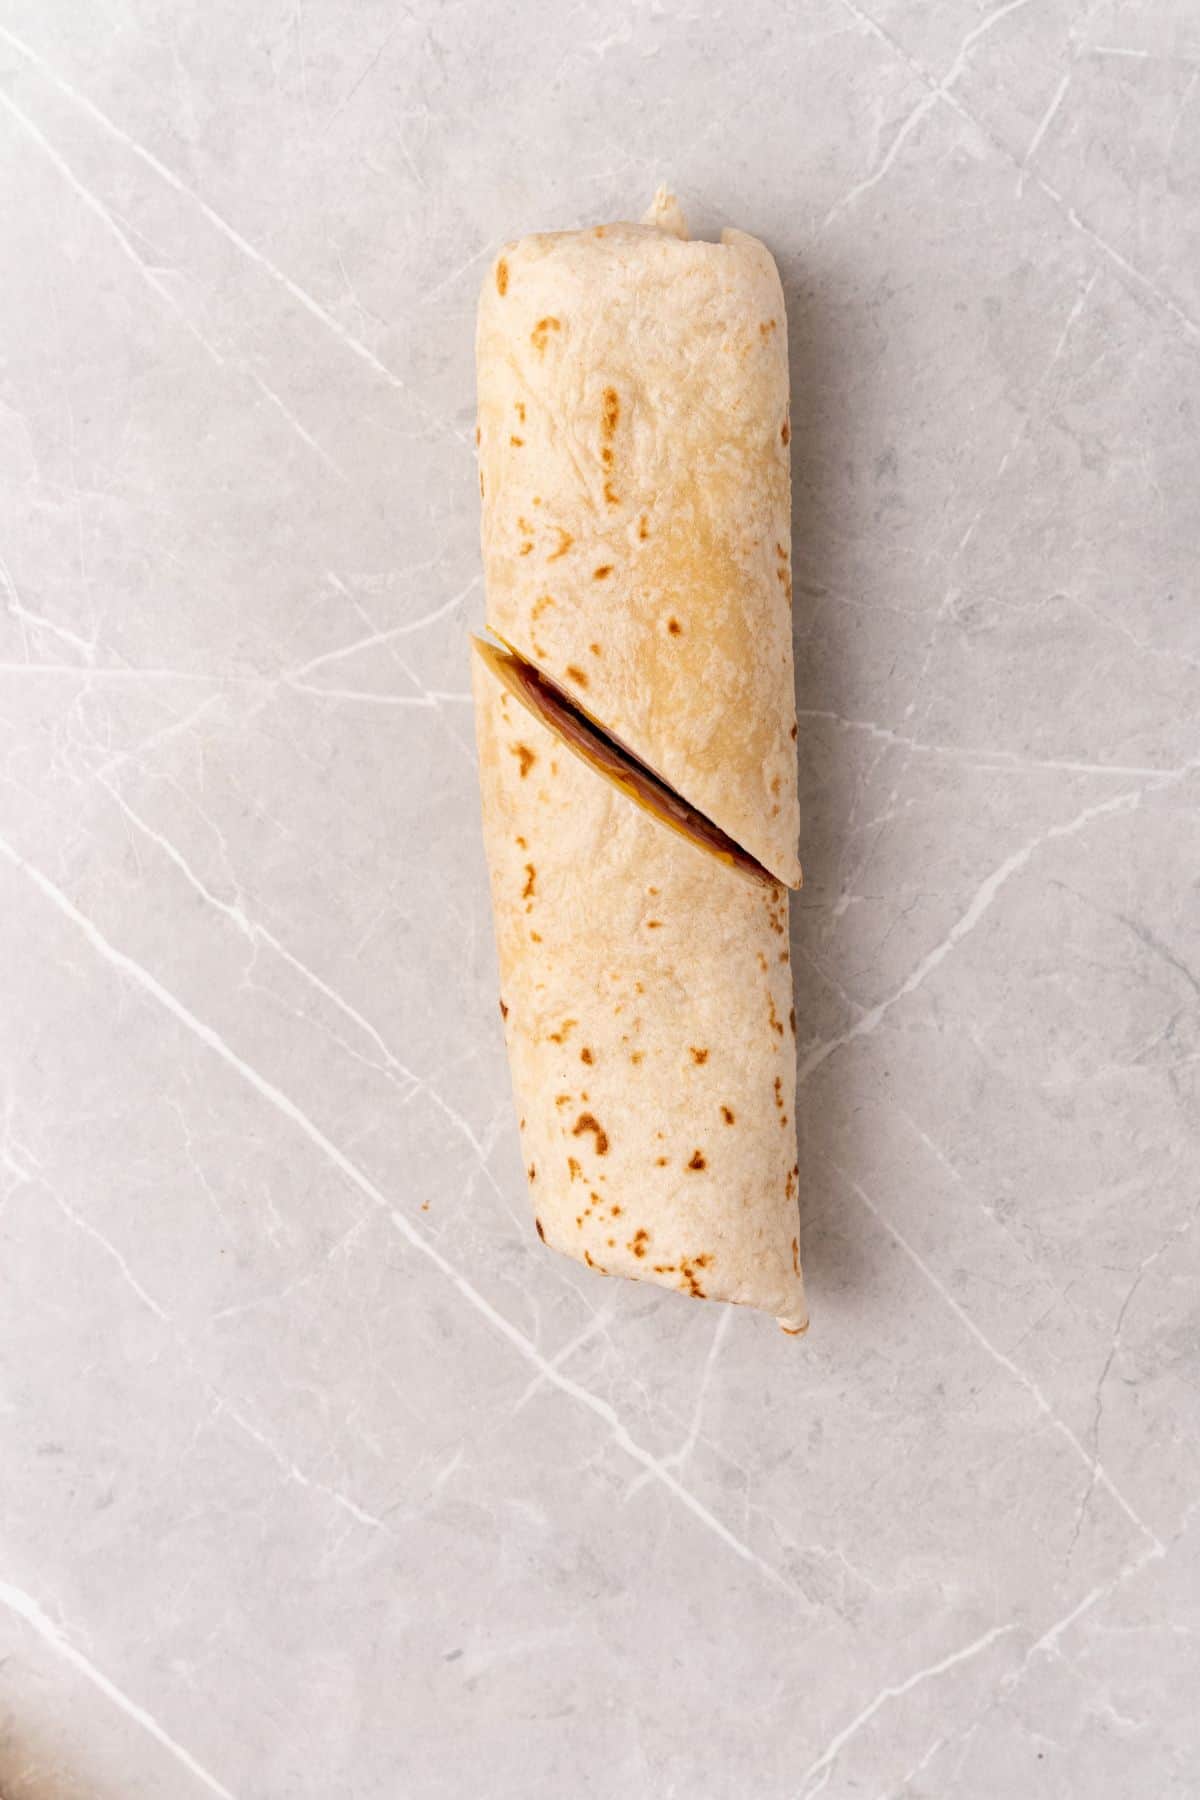 A cheese-filled burrito wraps generously with slices of ham on a sleek marble surface.